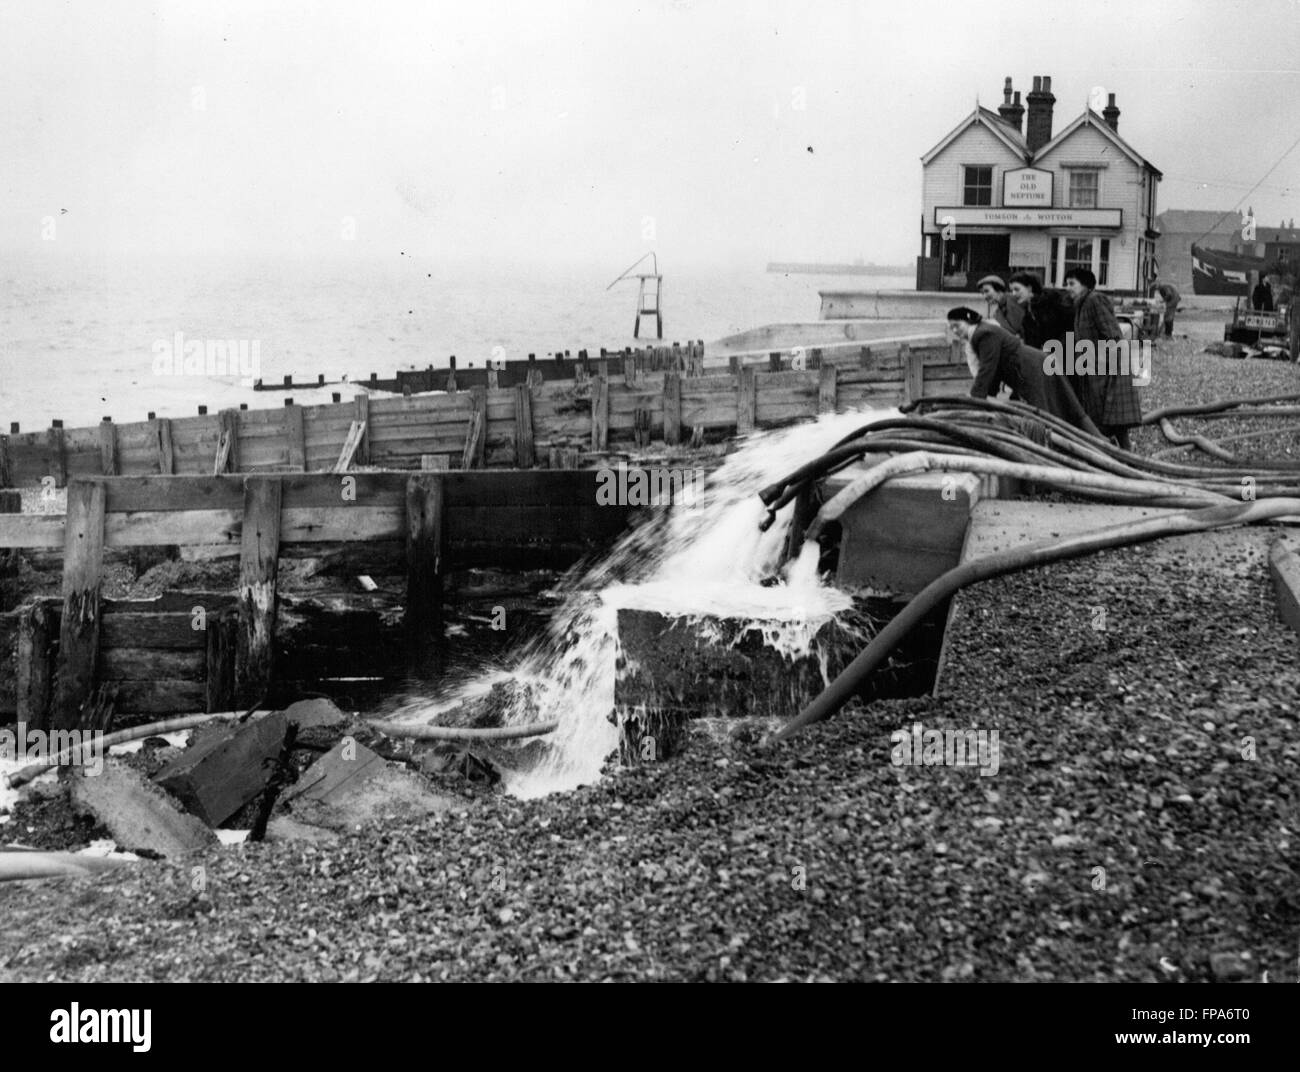 1962 - After The Flood - Scenes At Whitstable. Back Into The Sea - Goes The Water. Keystone Photo Shows:- Some of the locals seen as they watch the water pouring back into the sea from the fire hoses - during Operation Pump-Out' at Whitstable, Kent, today. © Keystone Pictures USA/ZUMAPRESS.com/Alamy Live News Stock Photo